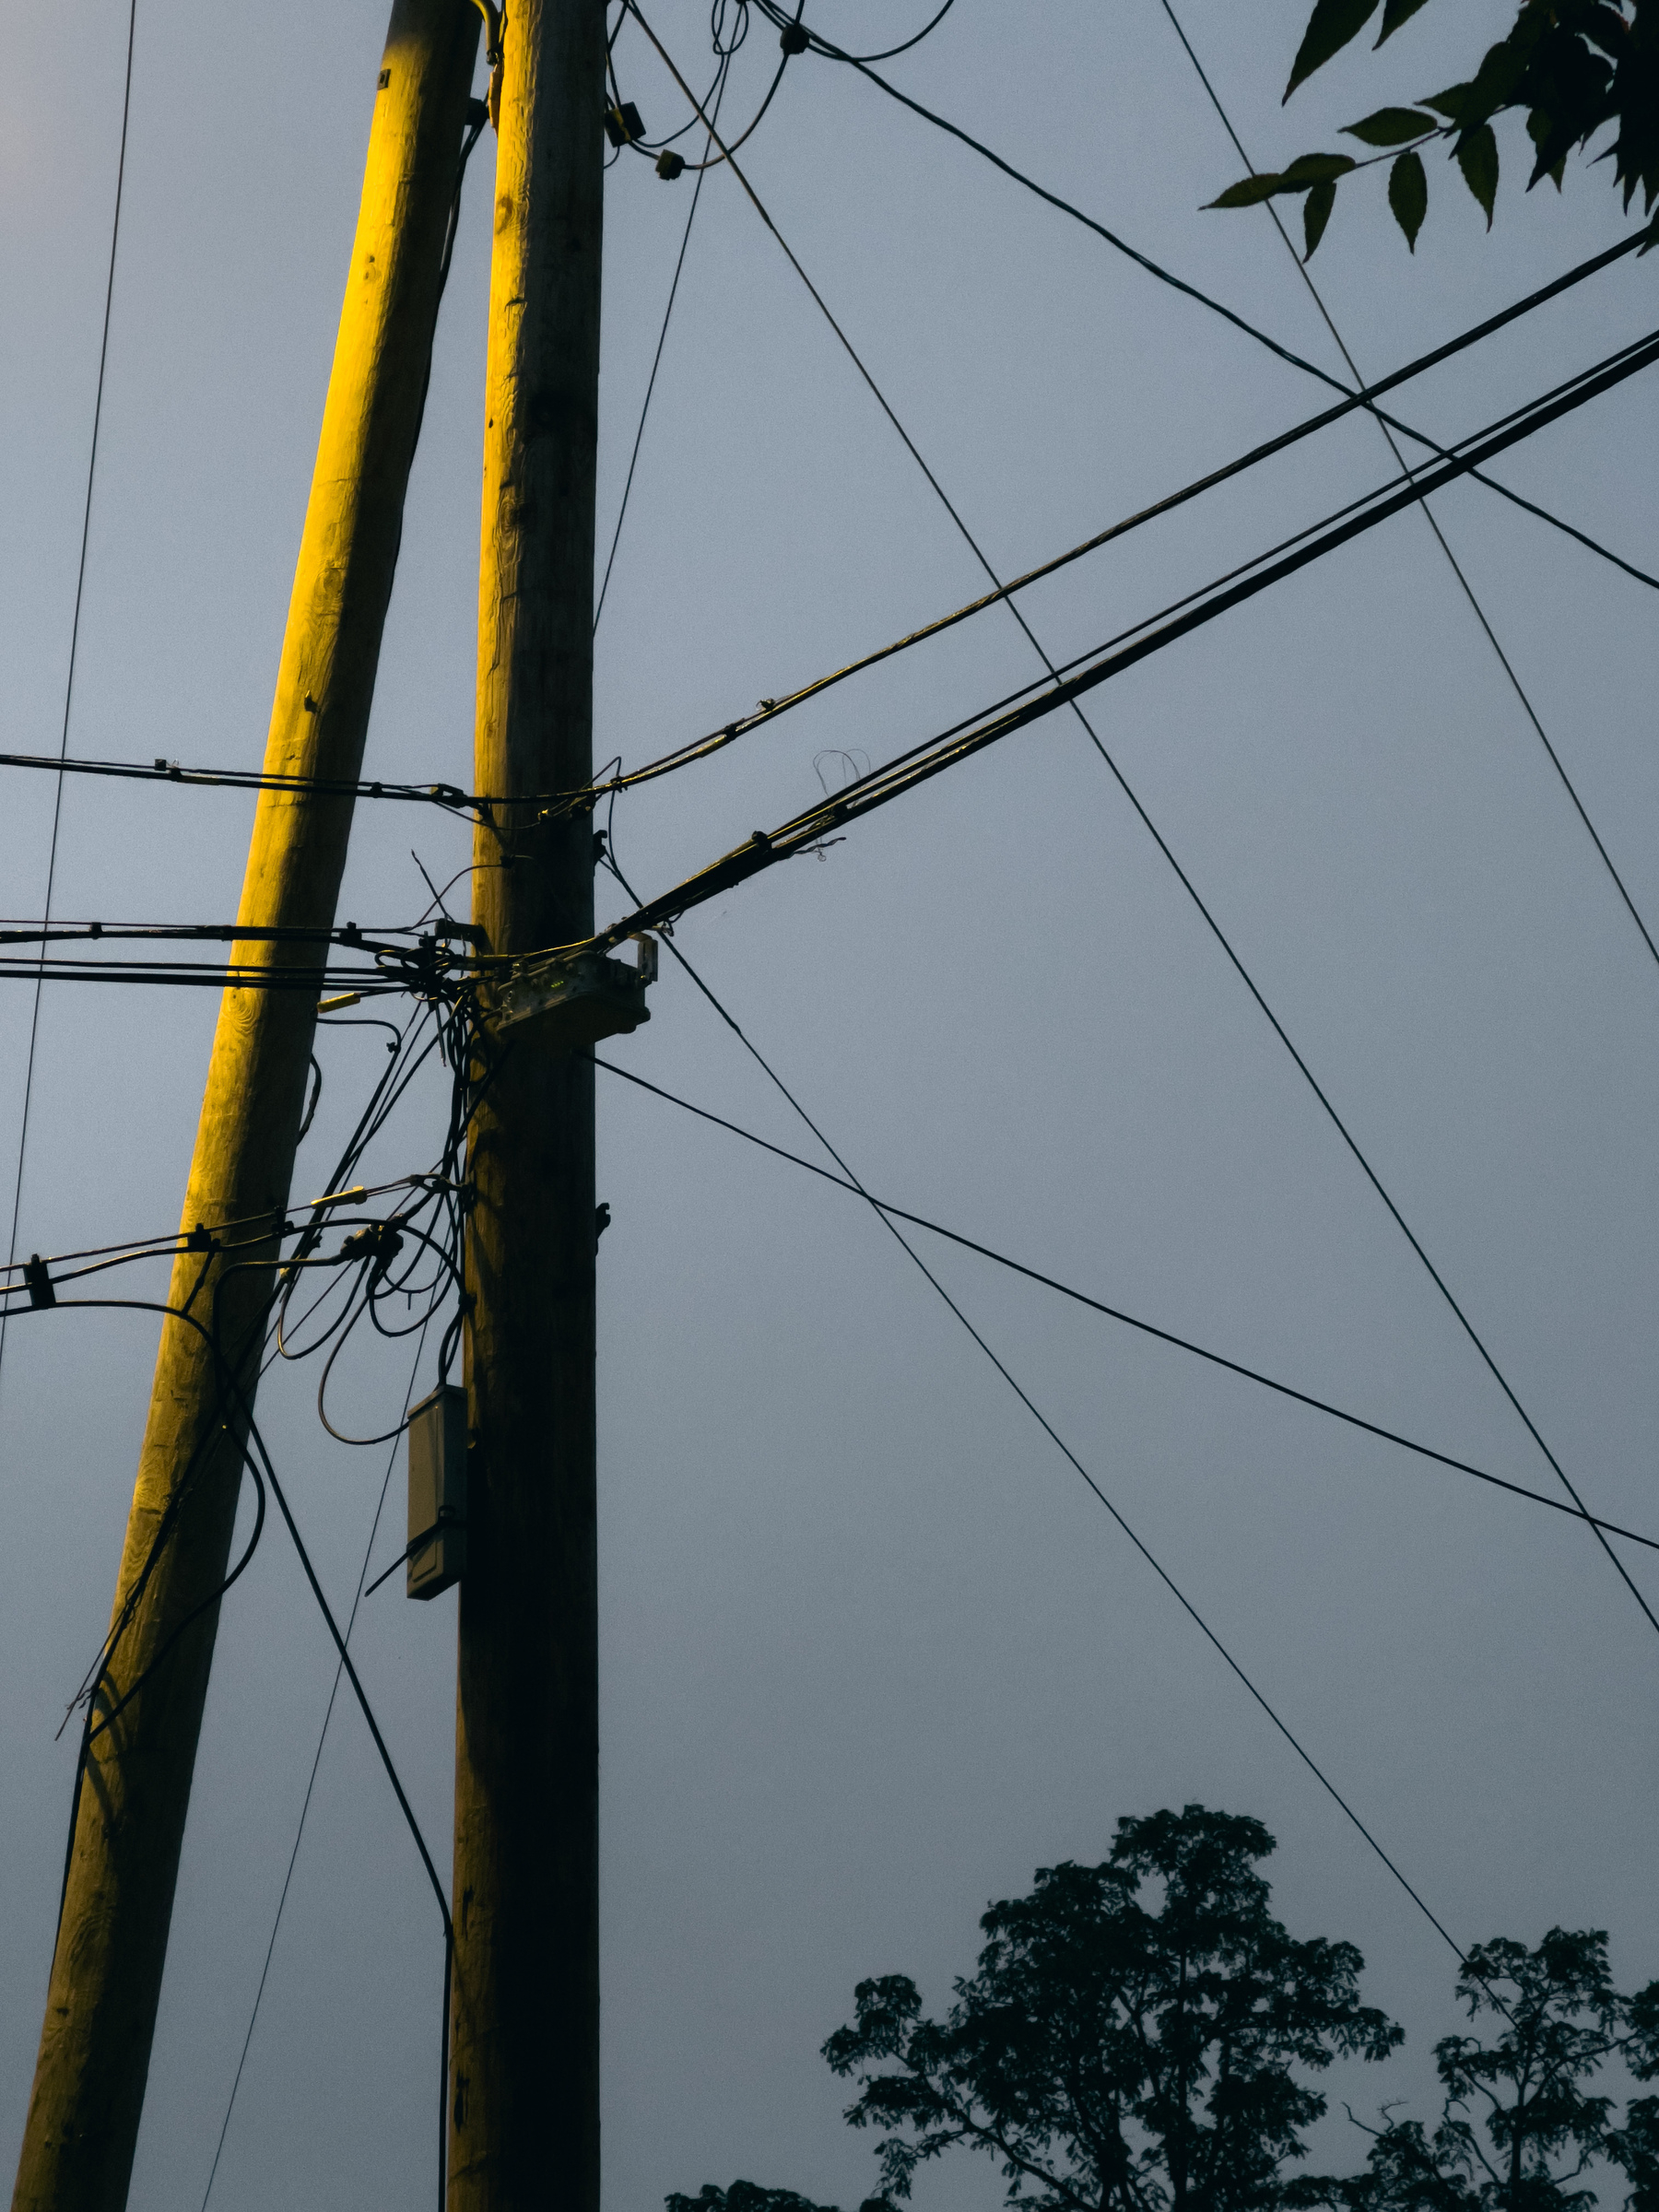 Utility pole with power and communication wires radiating out.